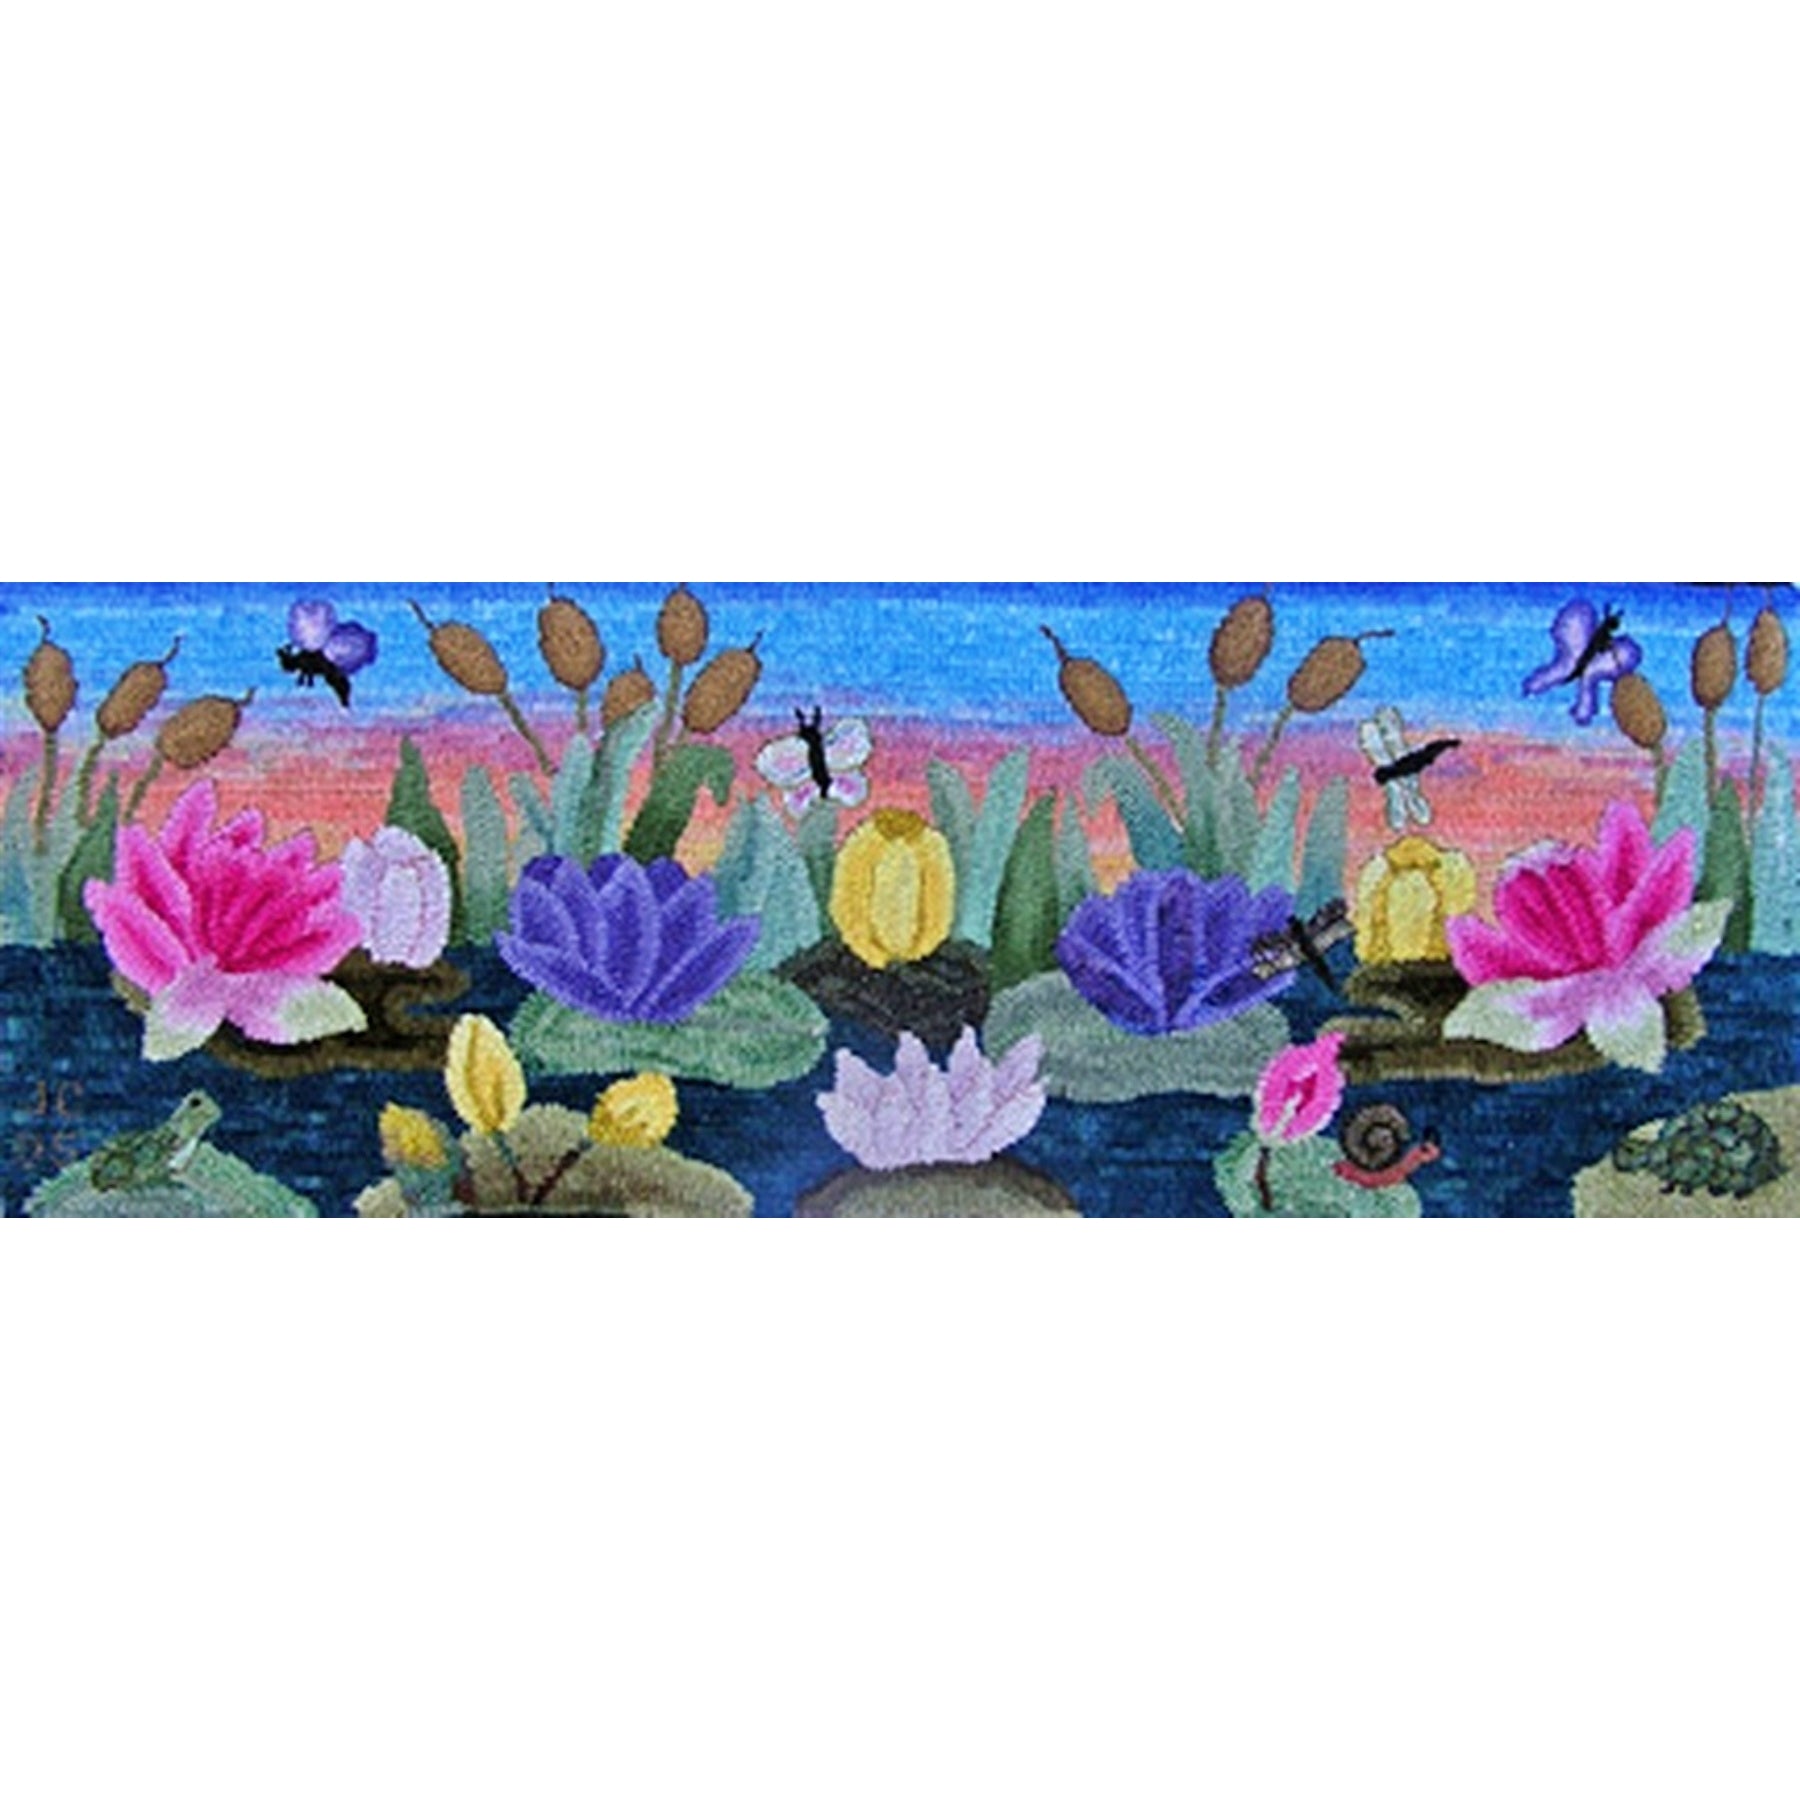 Lillies Of The Pond, rug hooked by Judy Carter